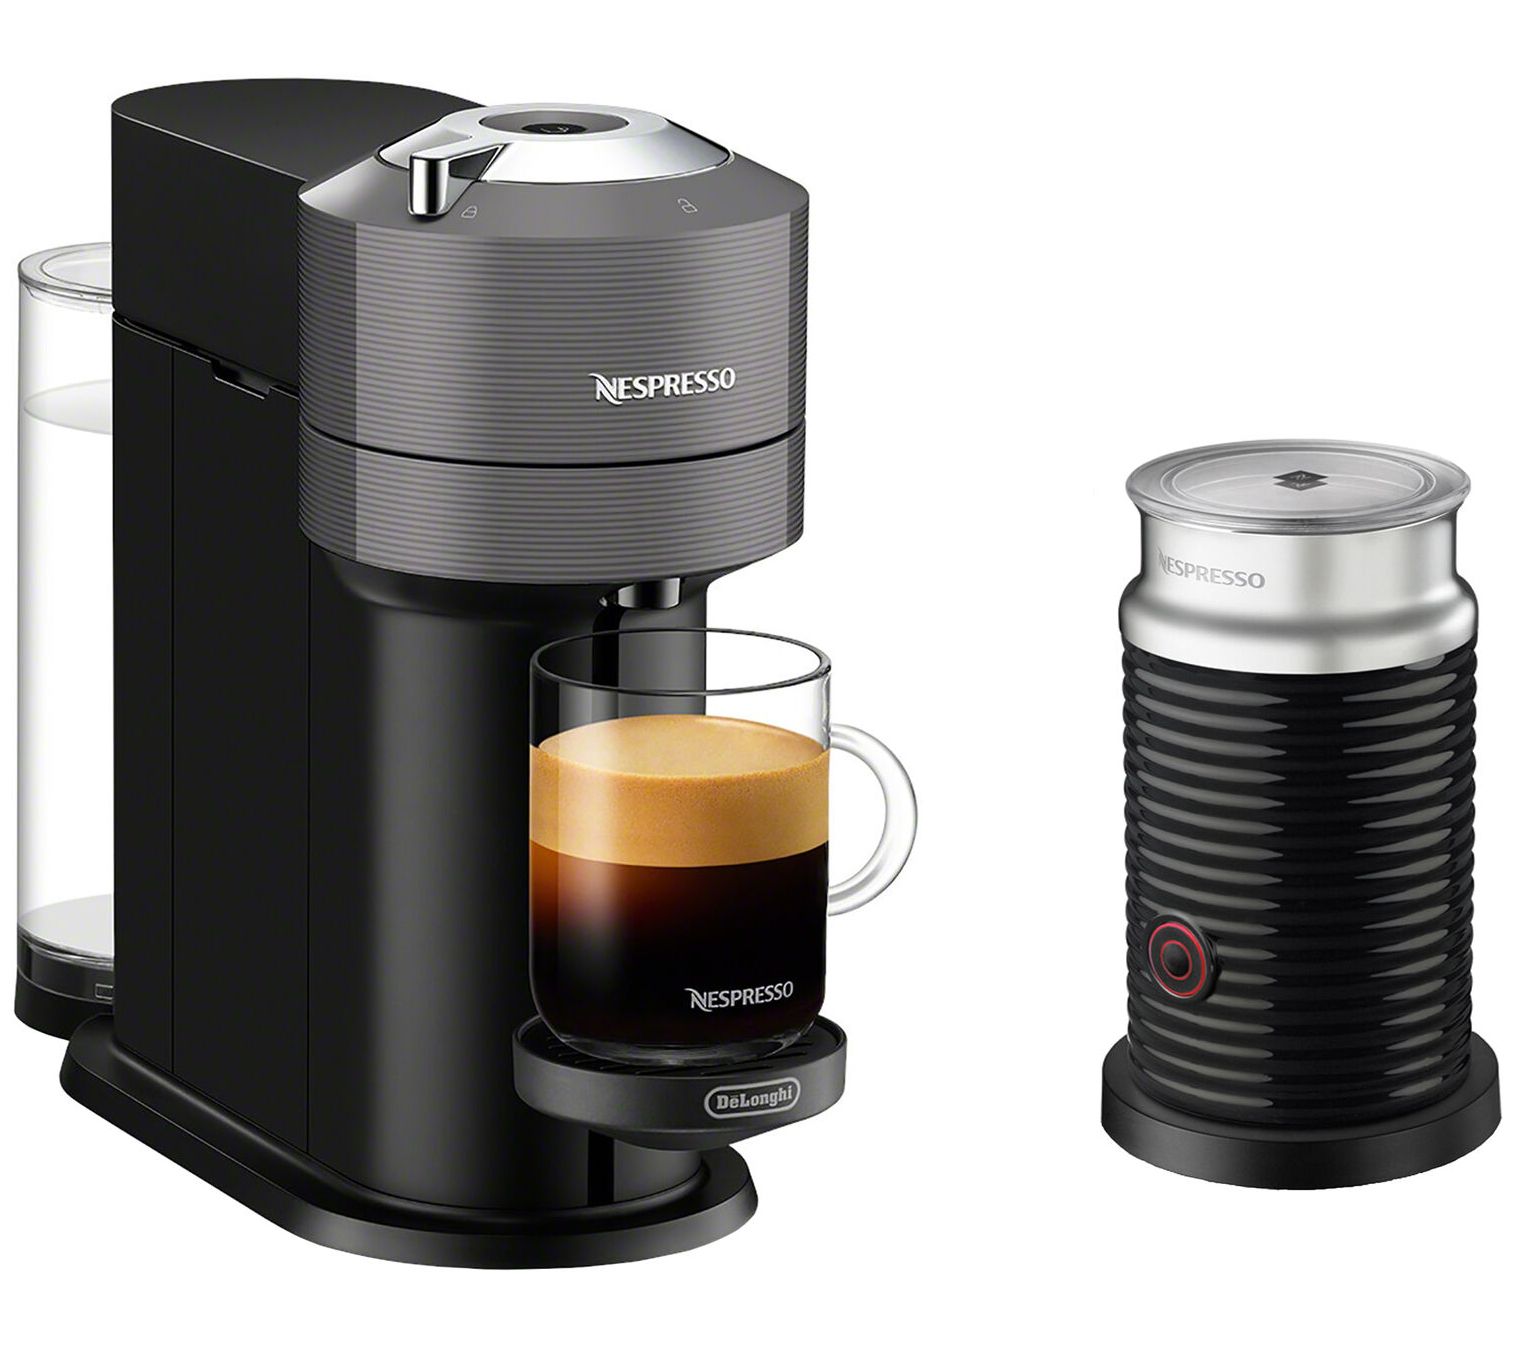 Nespresso Vertuo Next Review: Versatility Comes at a Cost